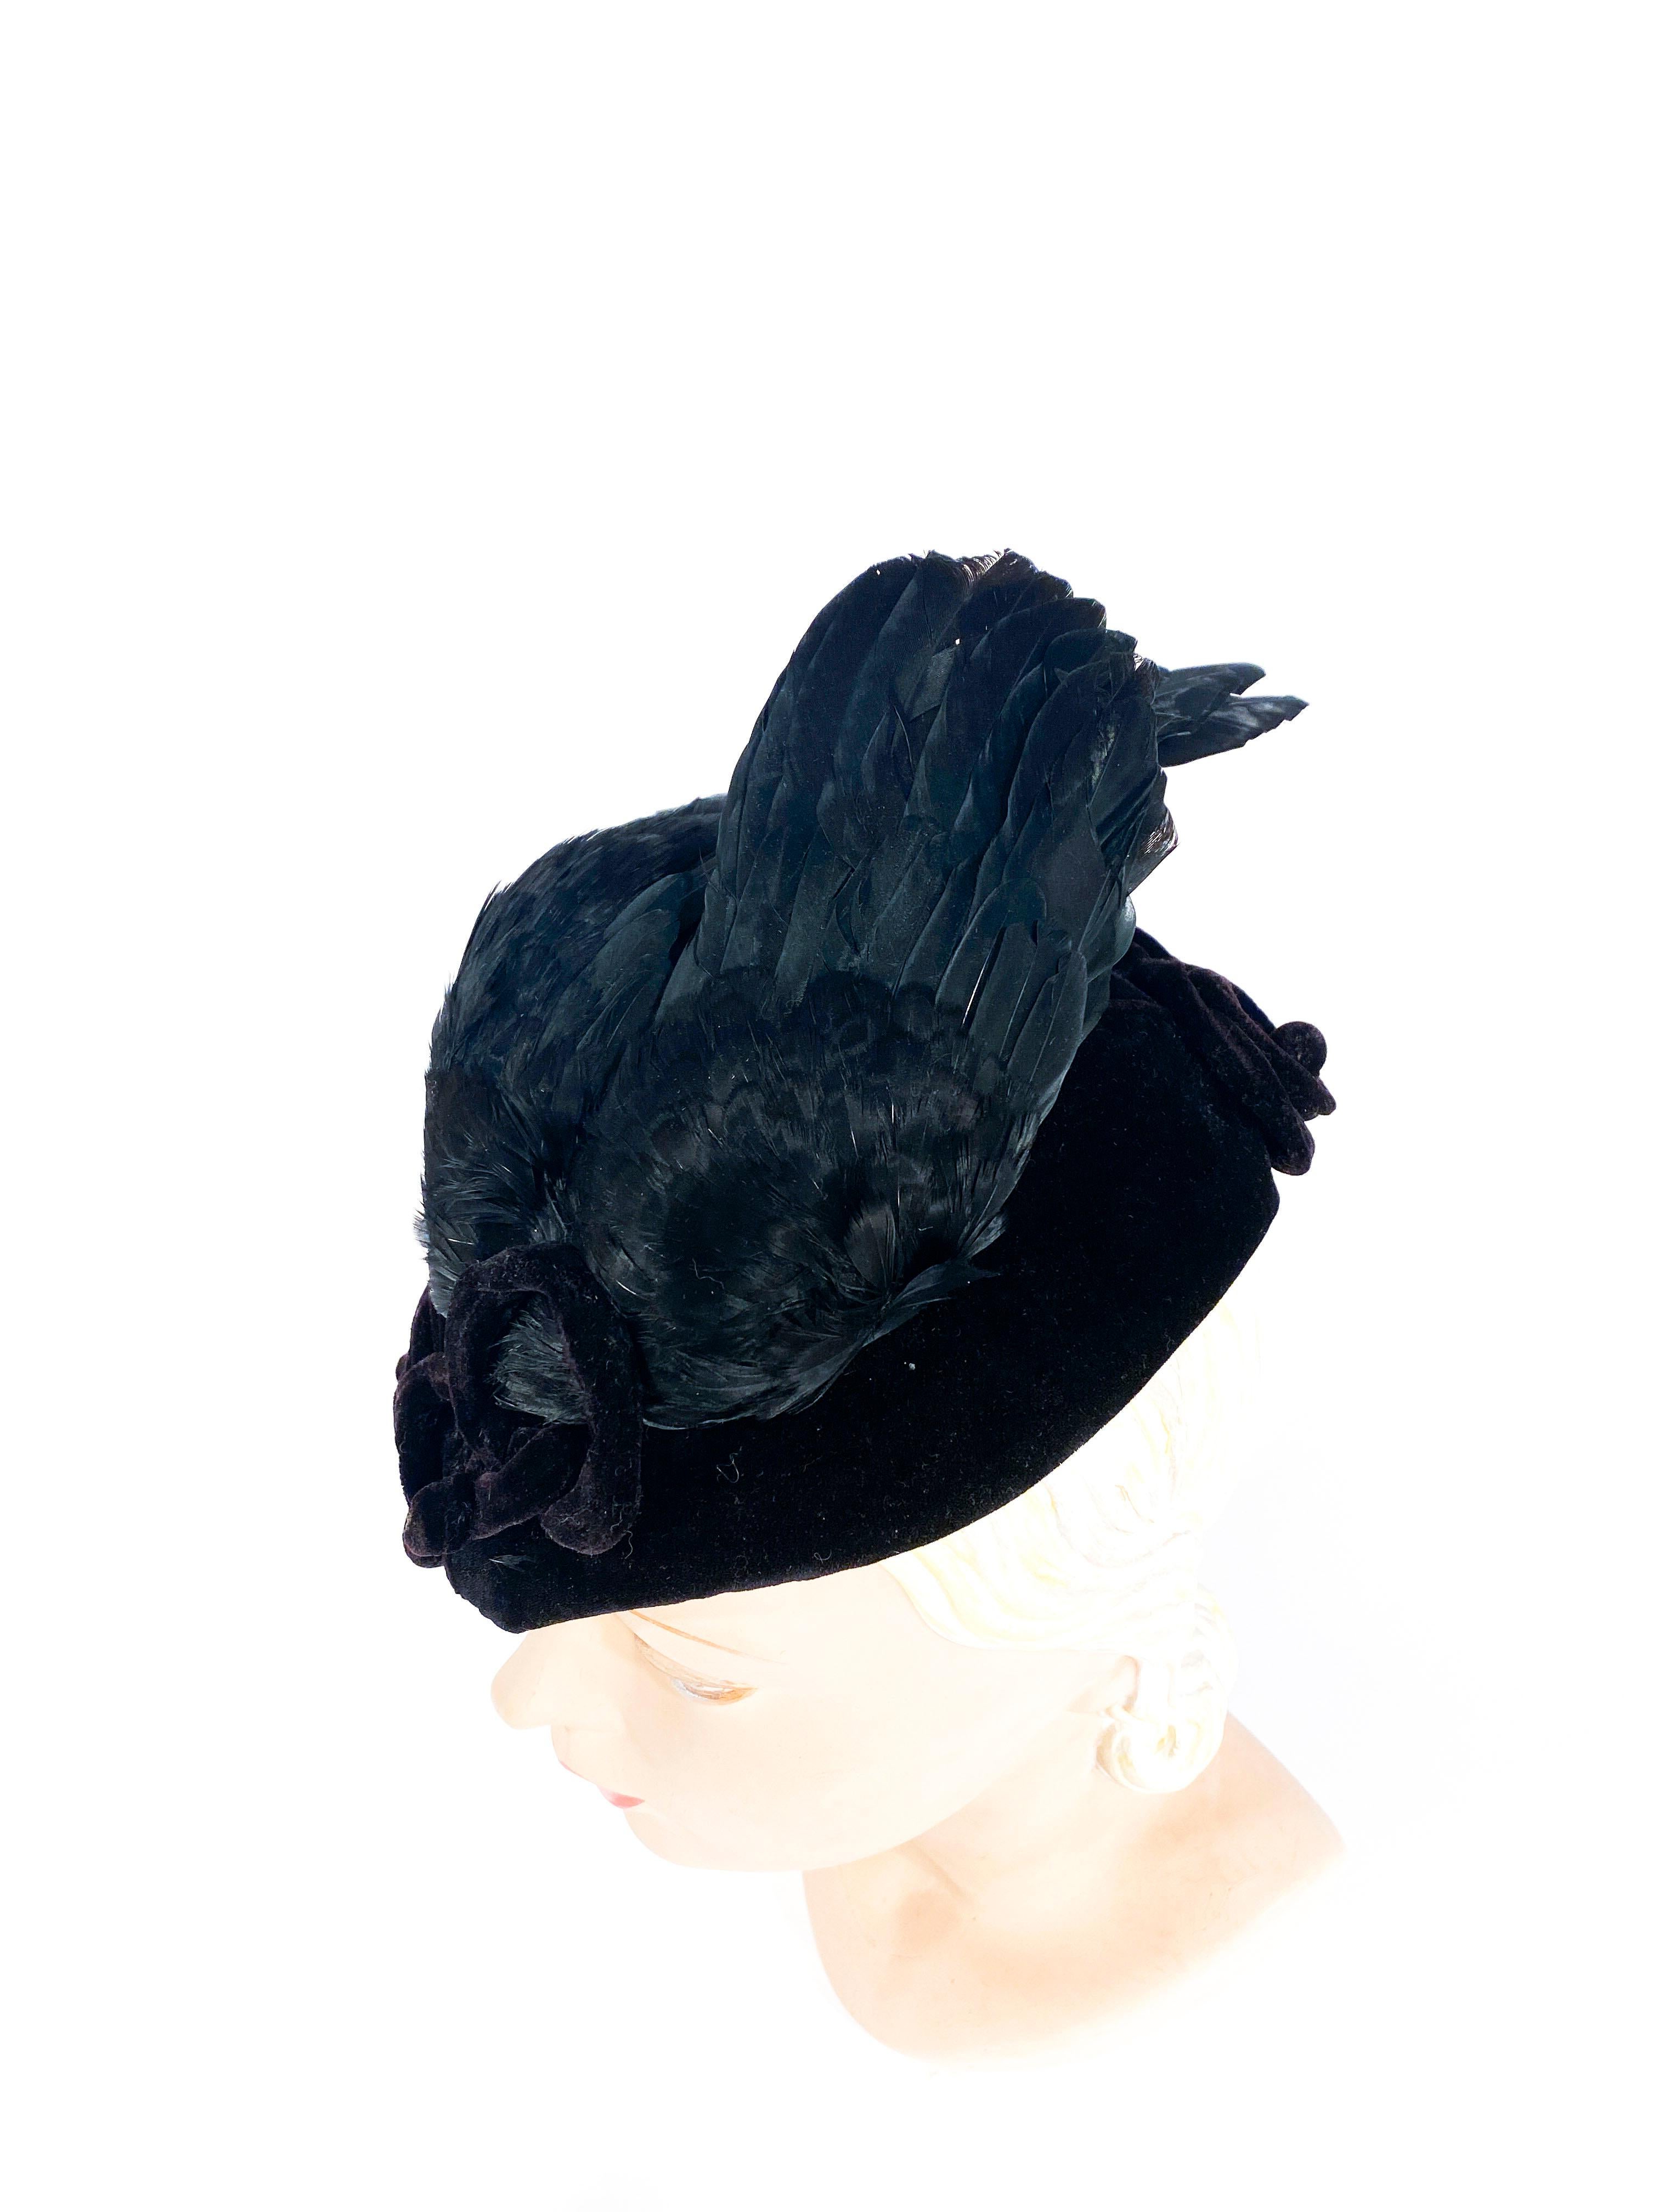 1930s I. Magnin Sculptured Black Velvet Perch Hat with Feathered Wings 2